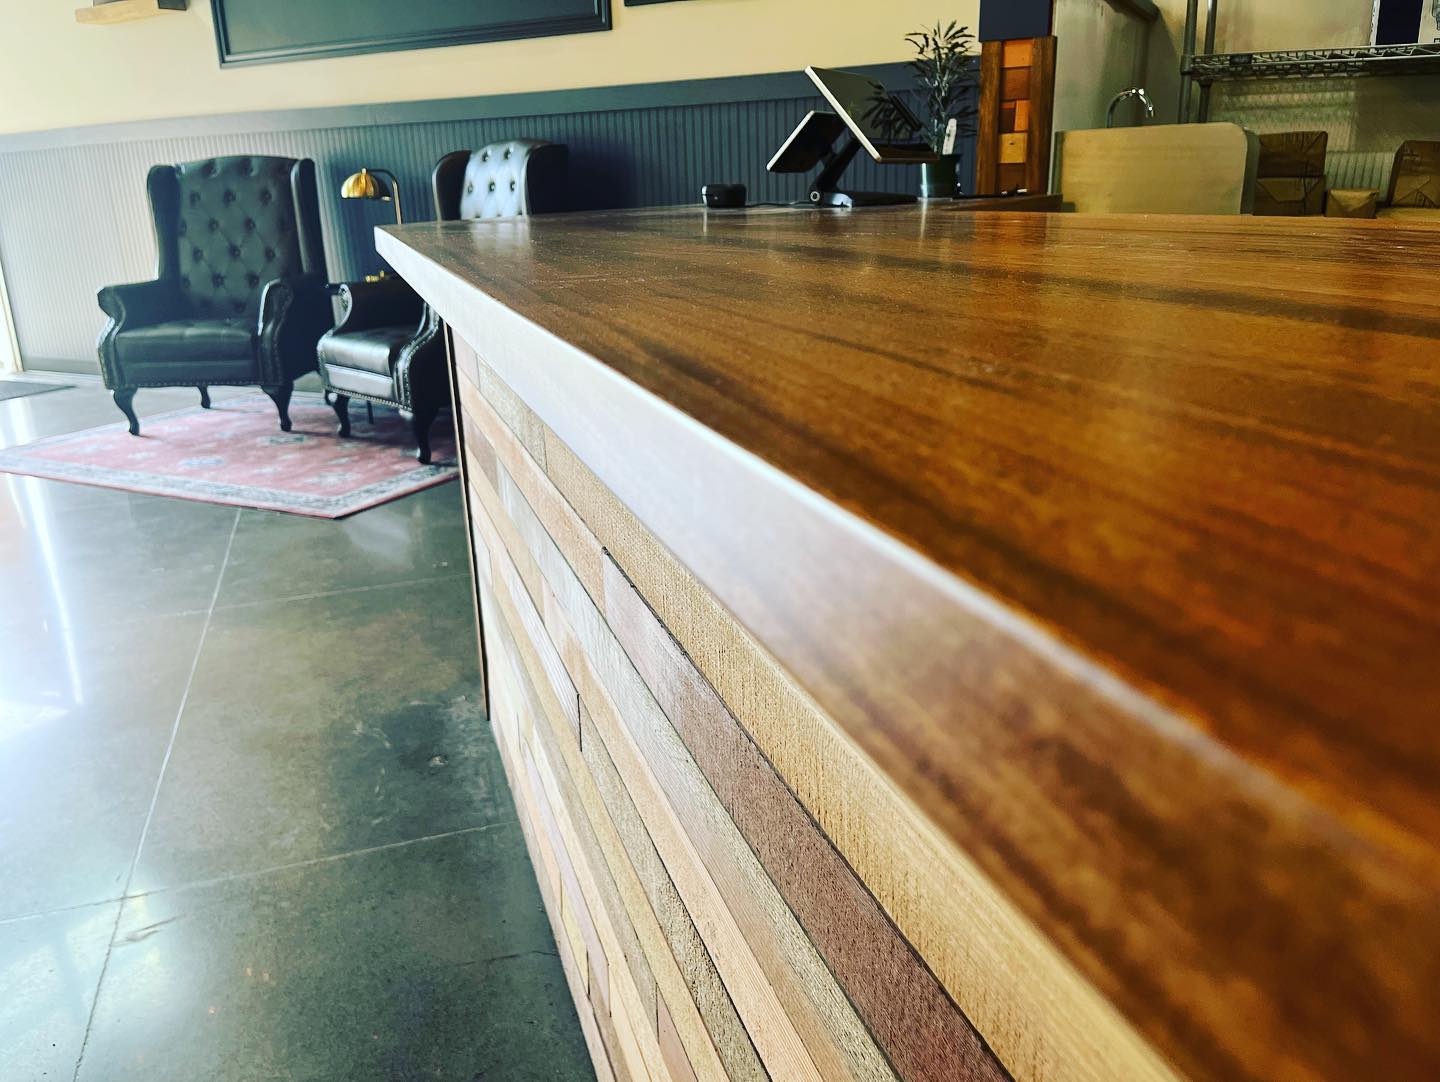 Counter and sitting area at the Tanasbourne location.